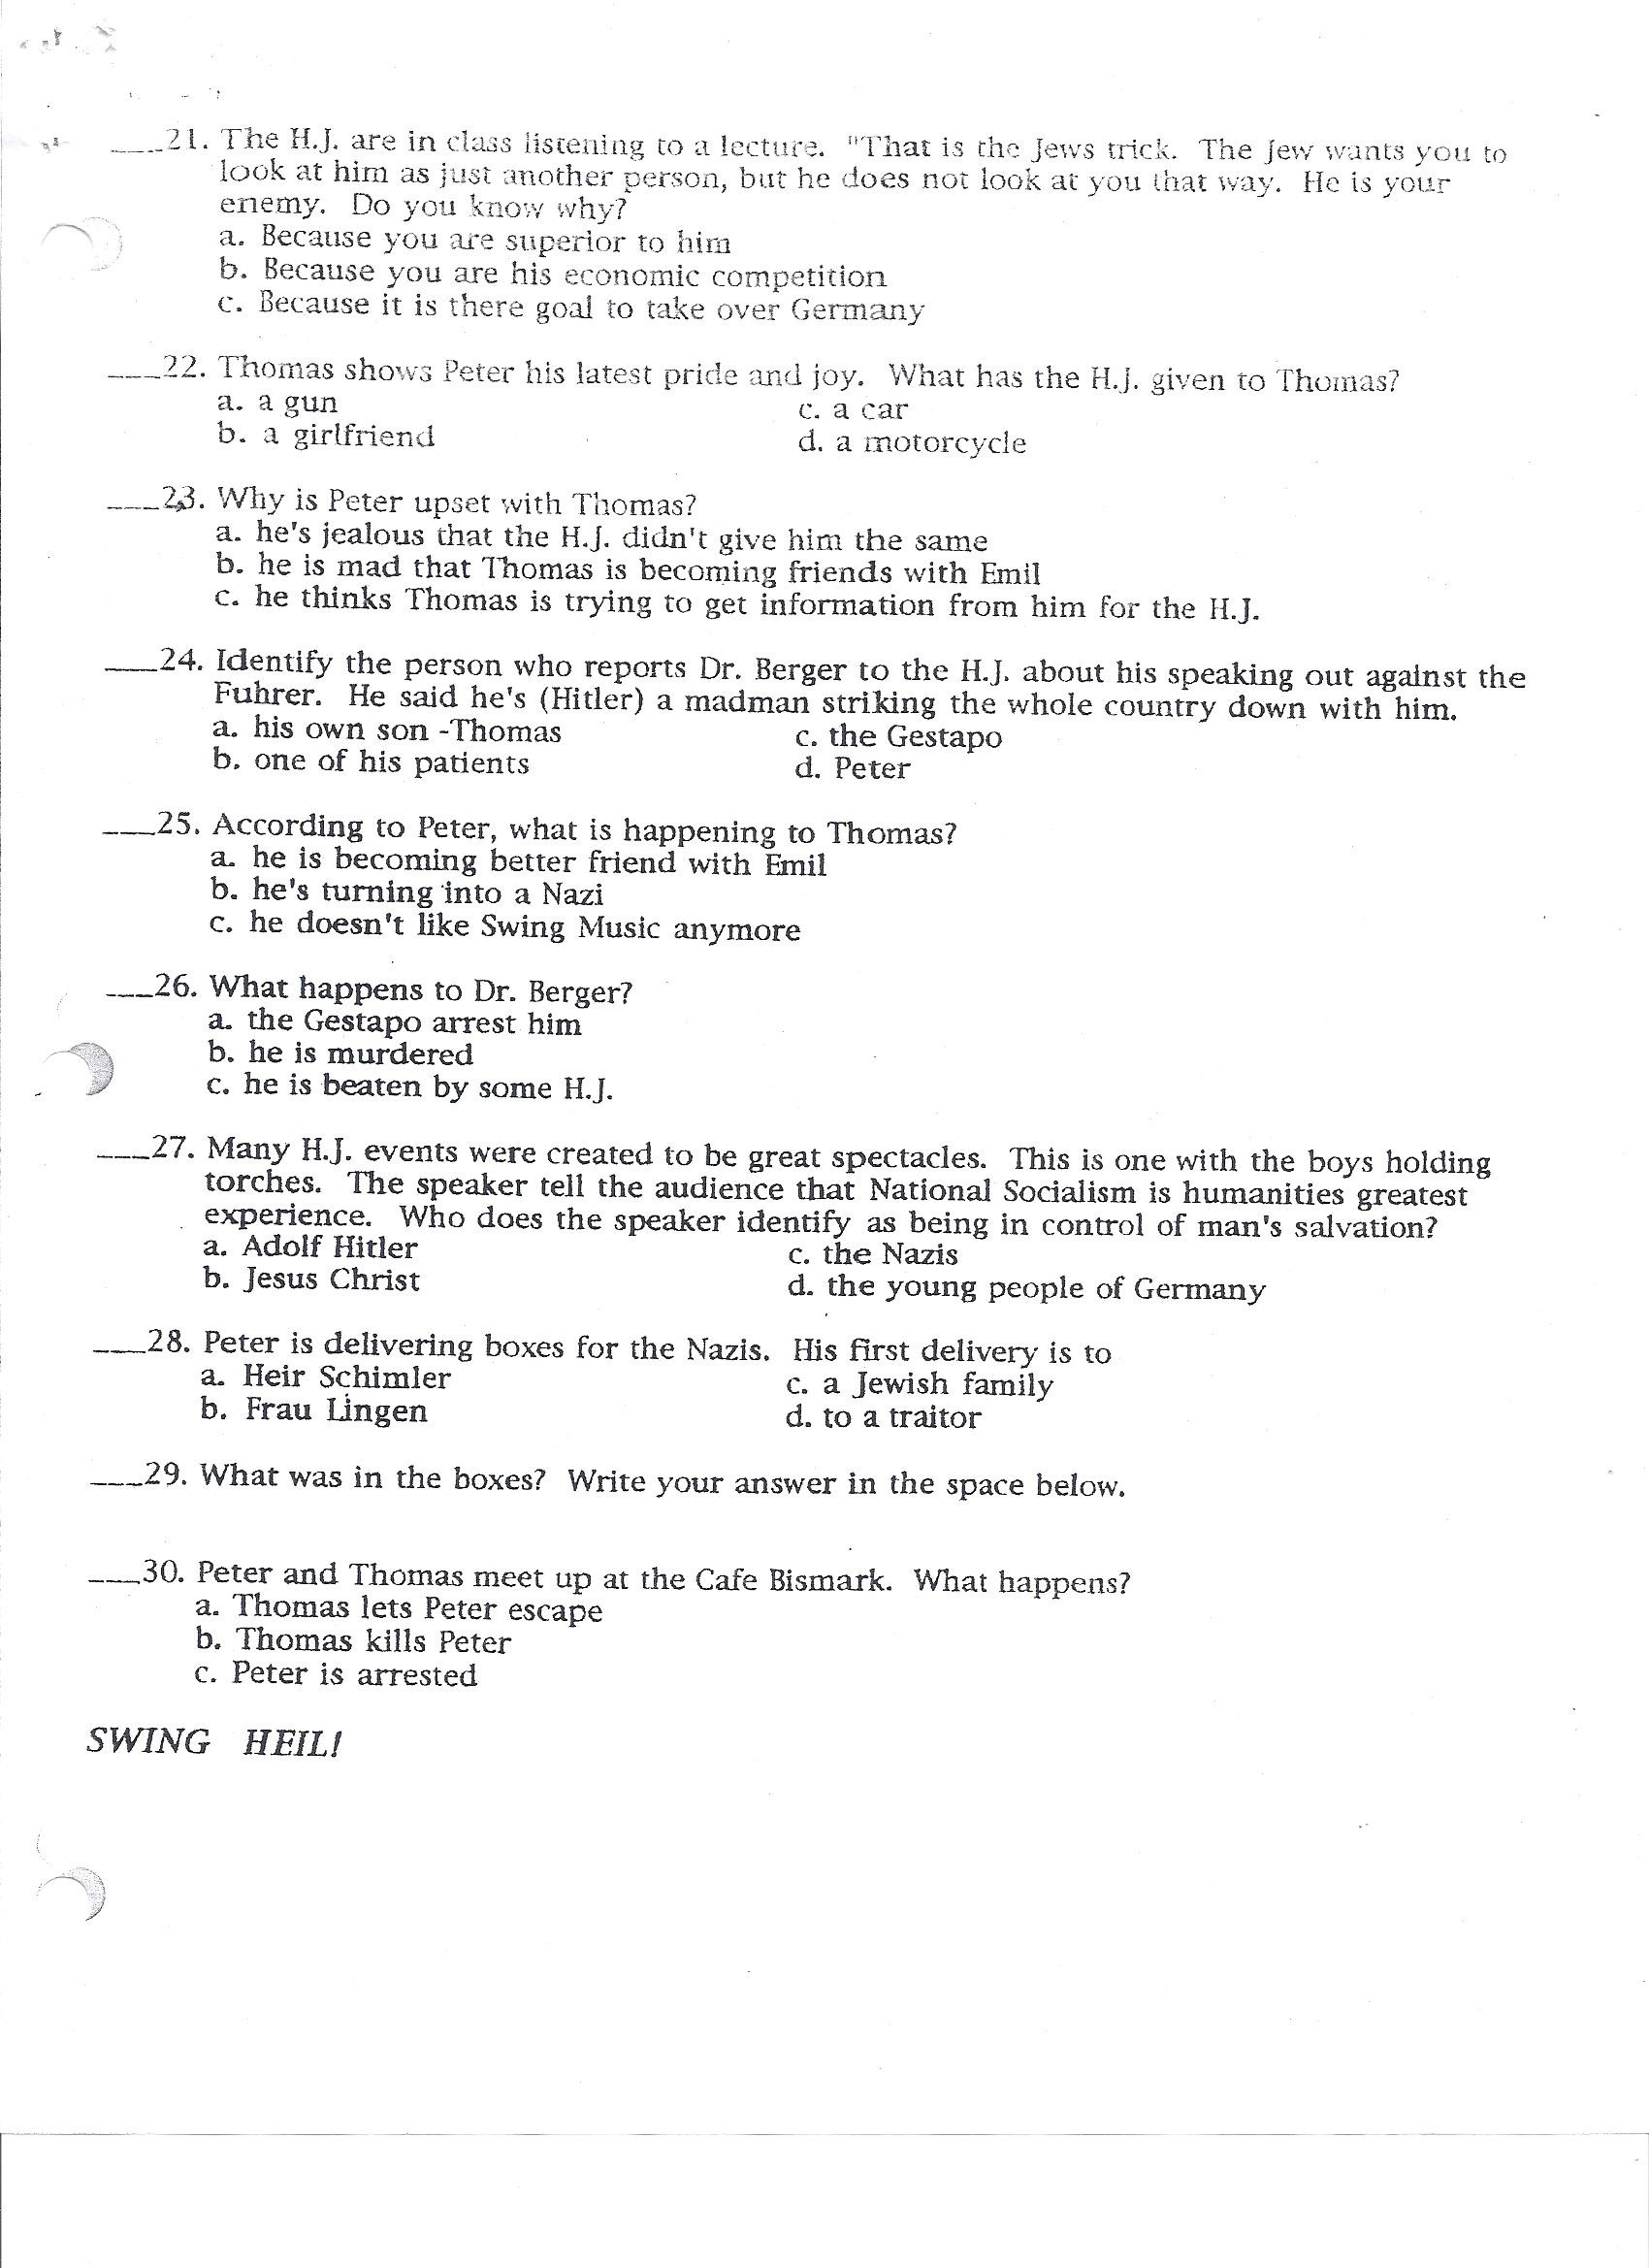 Swing Kids Questions
 W History Worksheets